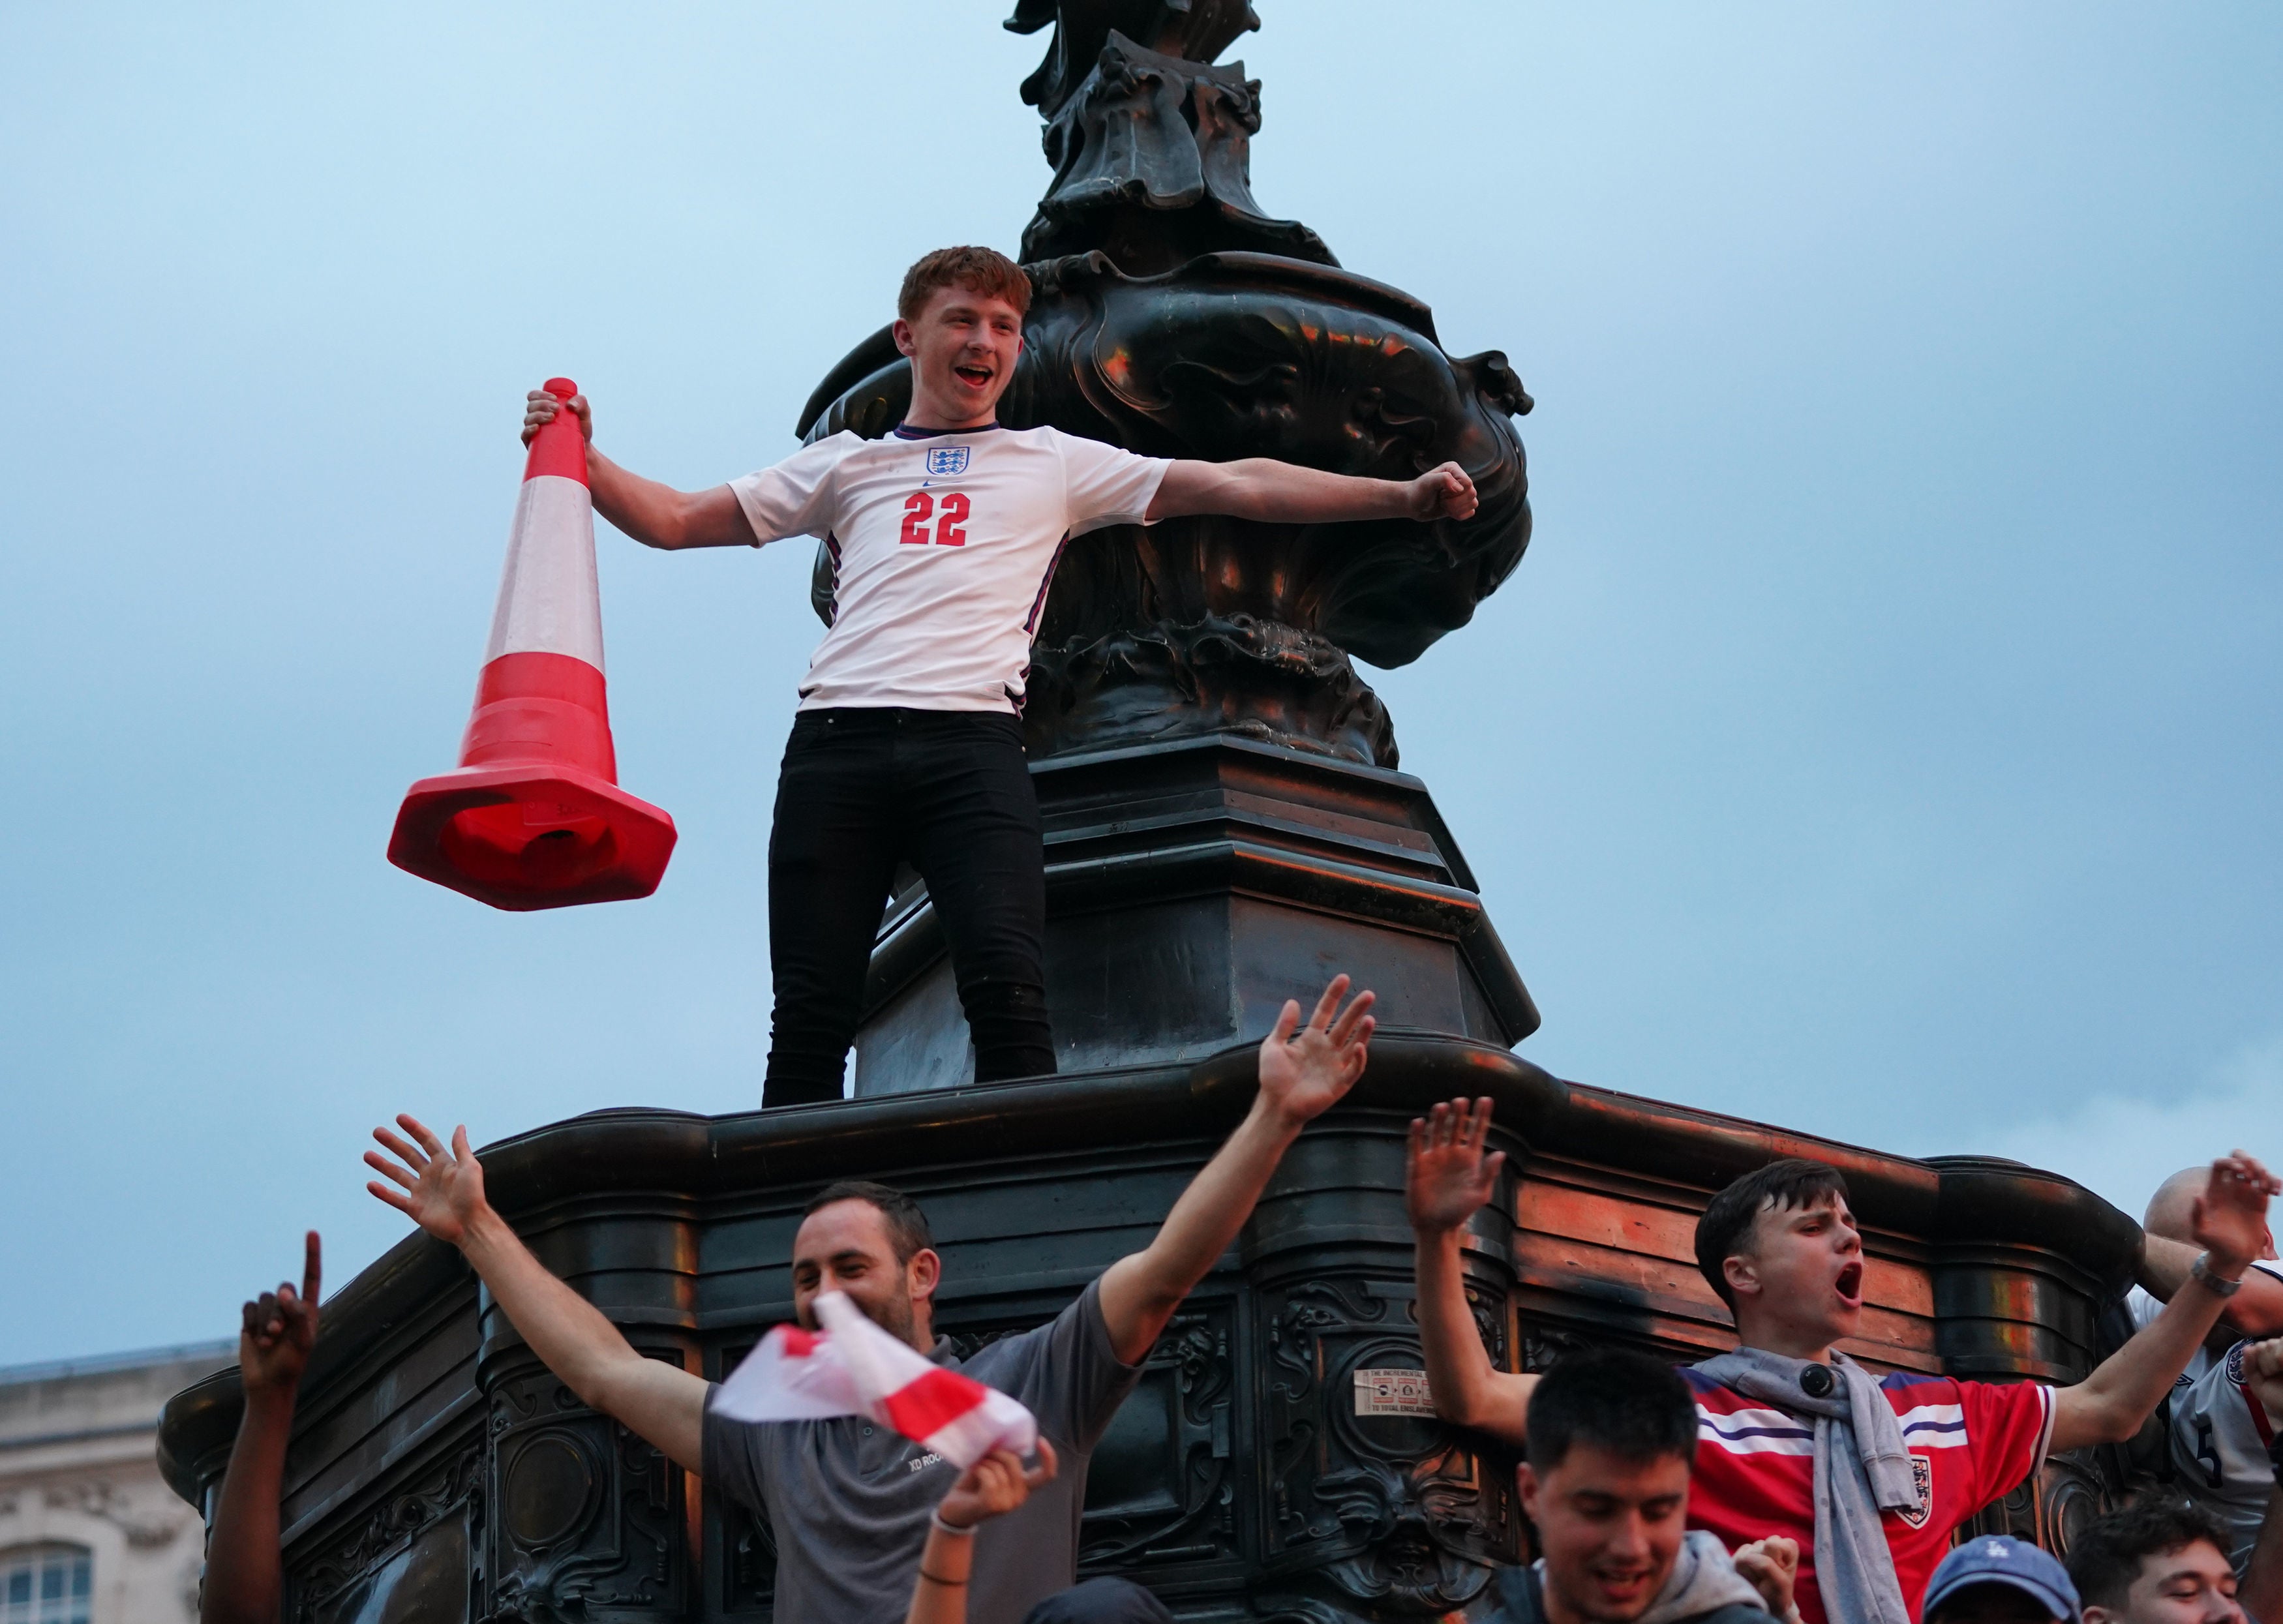 Fans gather under the Statue of Eros in Piccadilly Circus, London, celebrating England’s victory